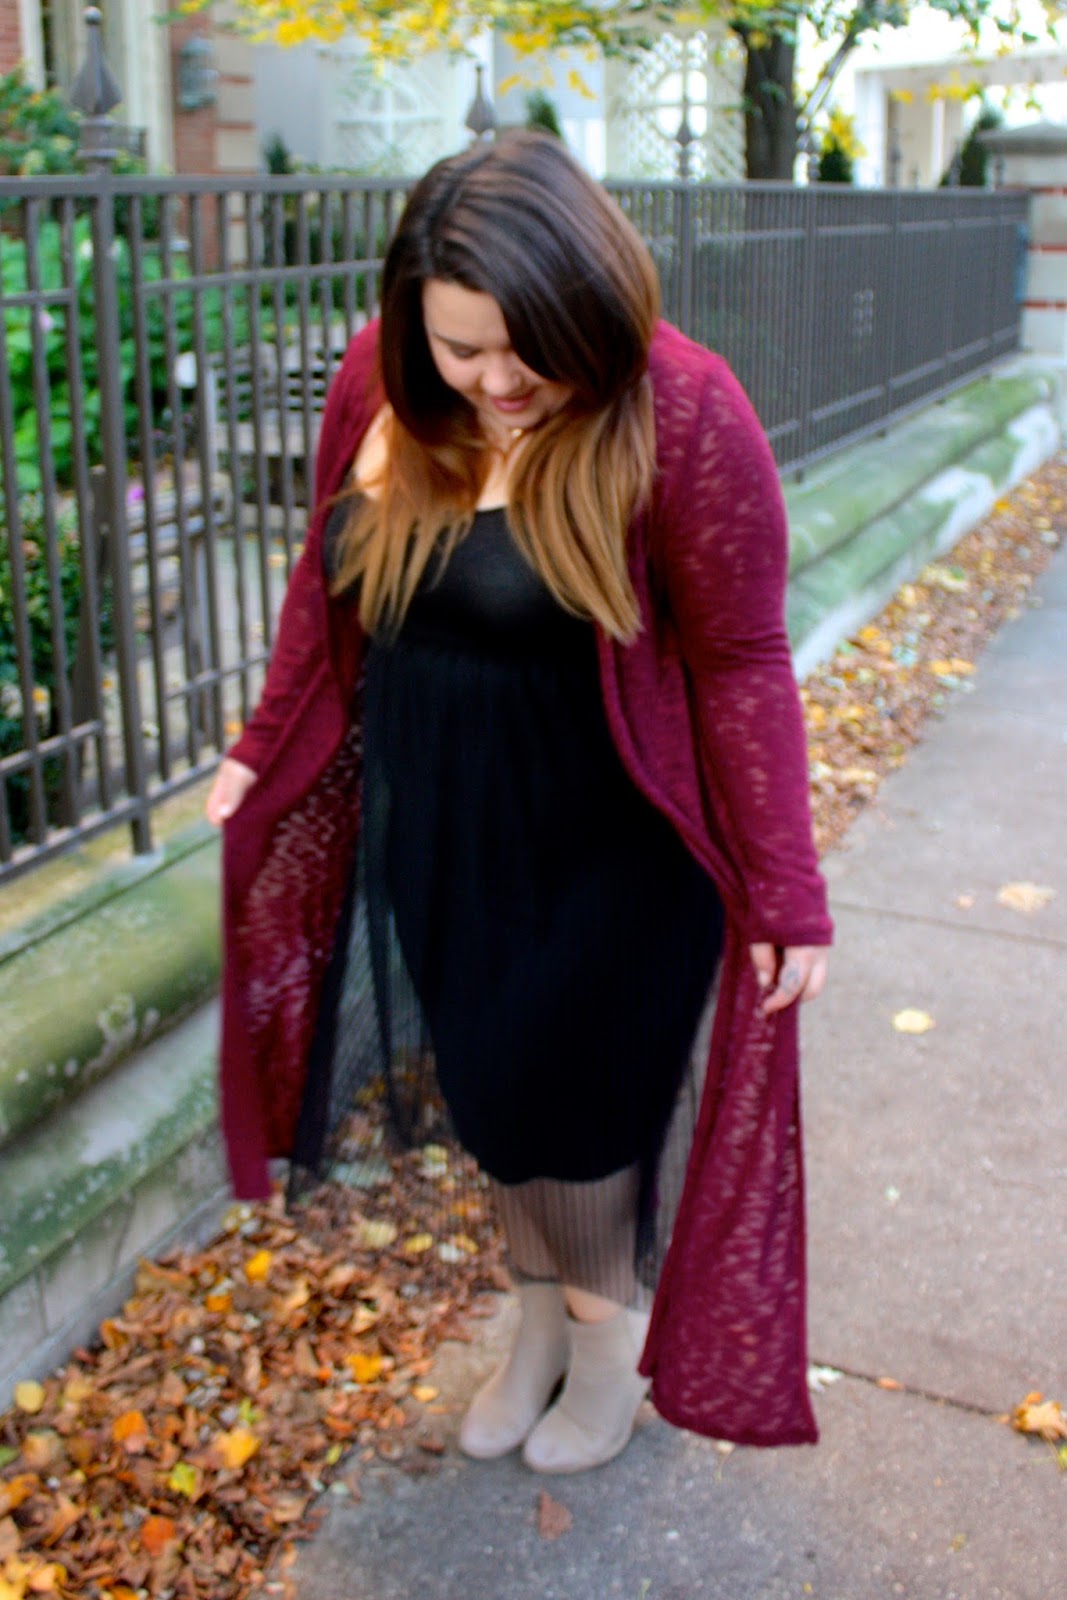 Natalie Craig, Natalie in the city, chicago, fashion blogger, plus size fashion blogger, plus size, ootd, duster cardigan, maxi cardigan, pleated tulle, tulle skirt on plus size women, full figured, see through dress, burgundy, fall fashion, chicago blogger, ankle boots for plus size, what to wear with a duster cardigan, Love EmilyD, chicago doordinate necklace